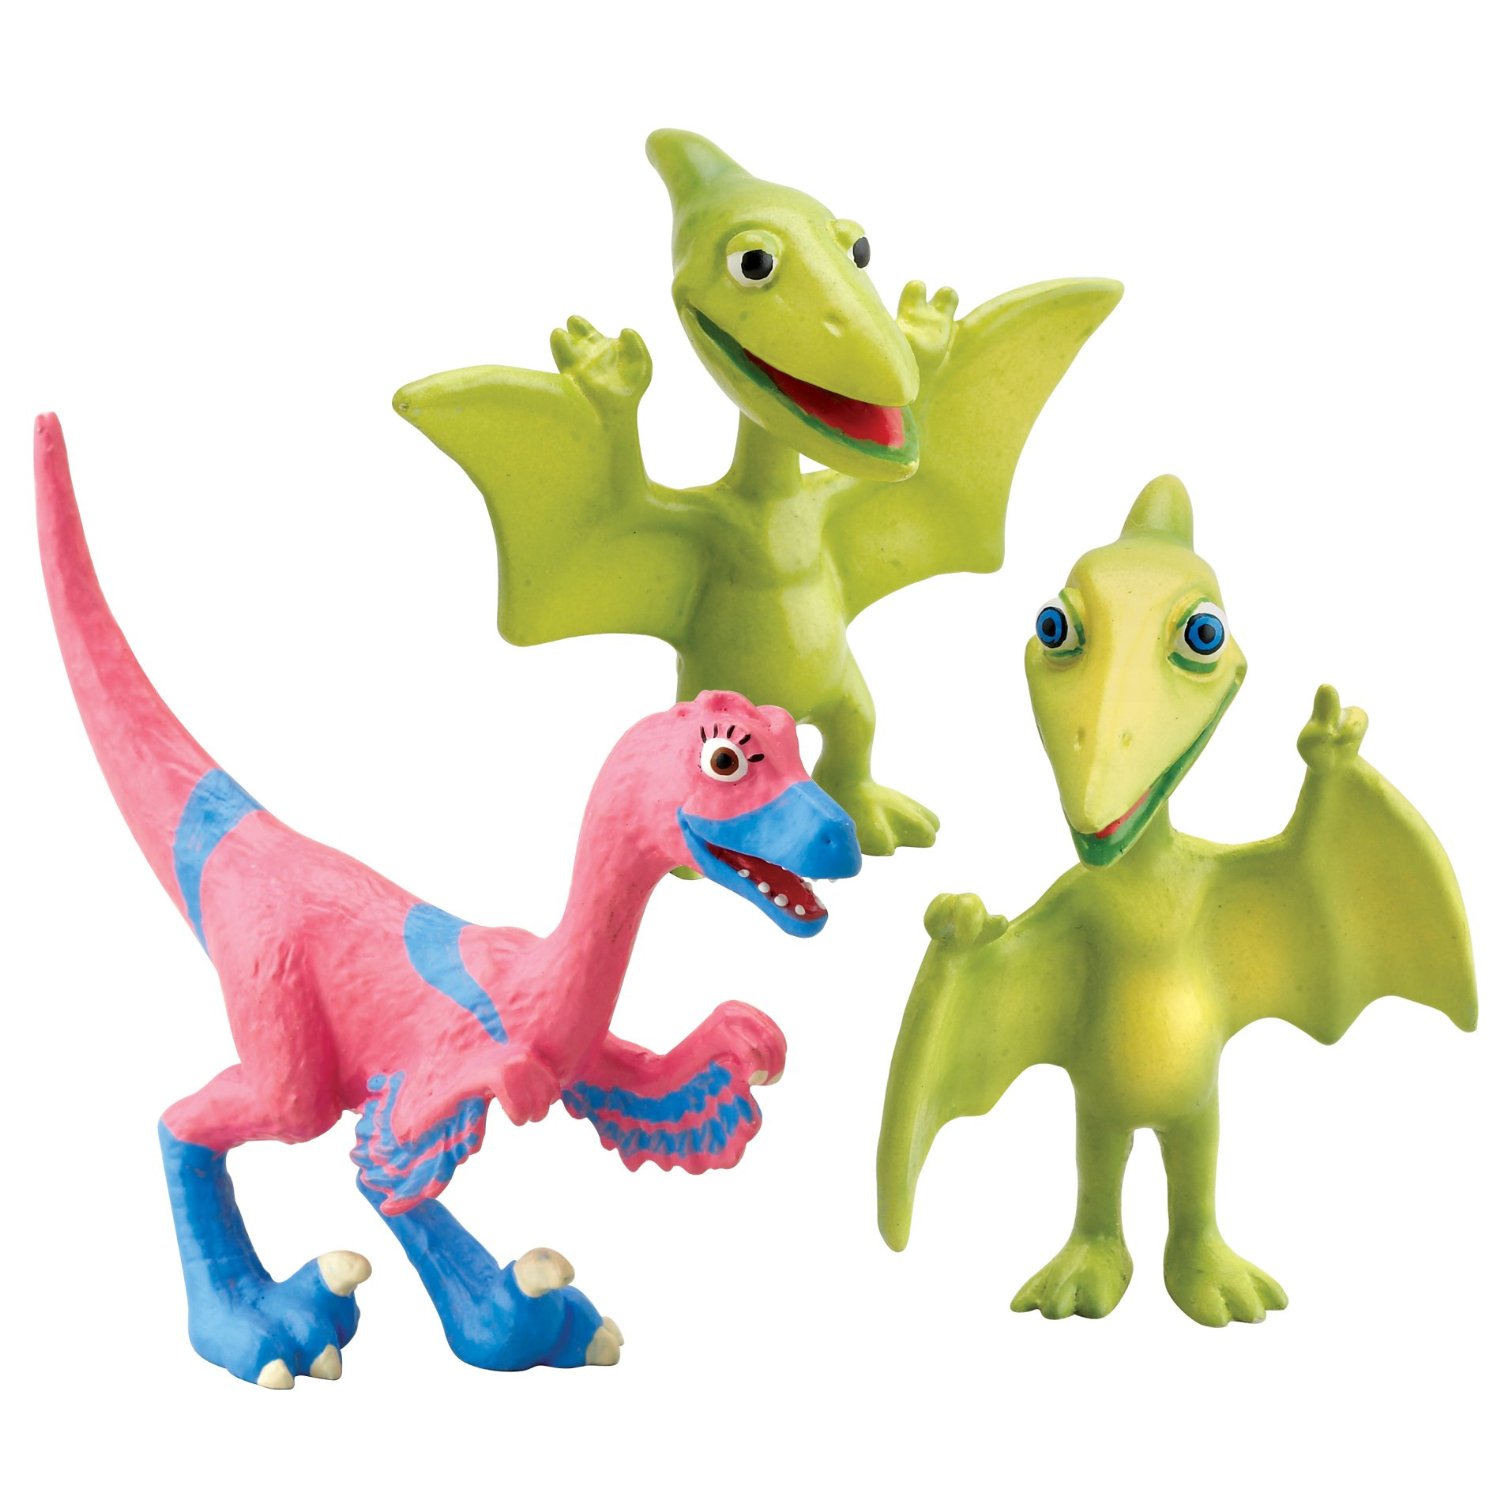 Holiday Giveaway Bash - Dinosaur Train toys from Jim Henson toys! 